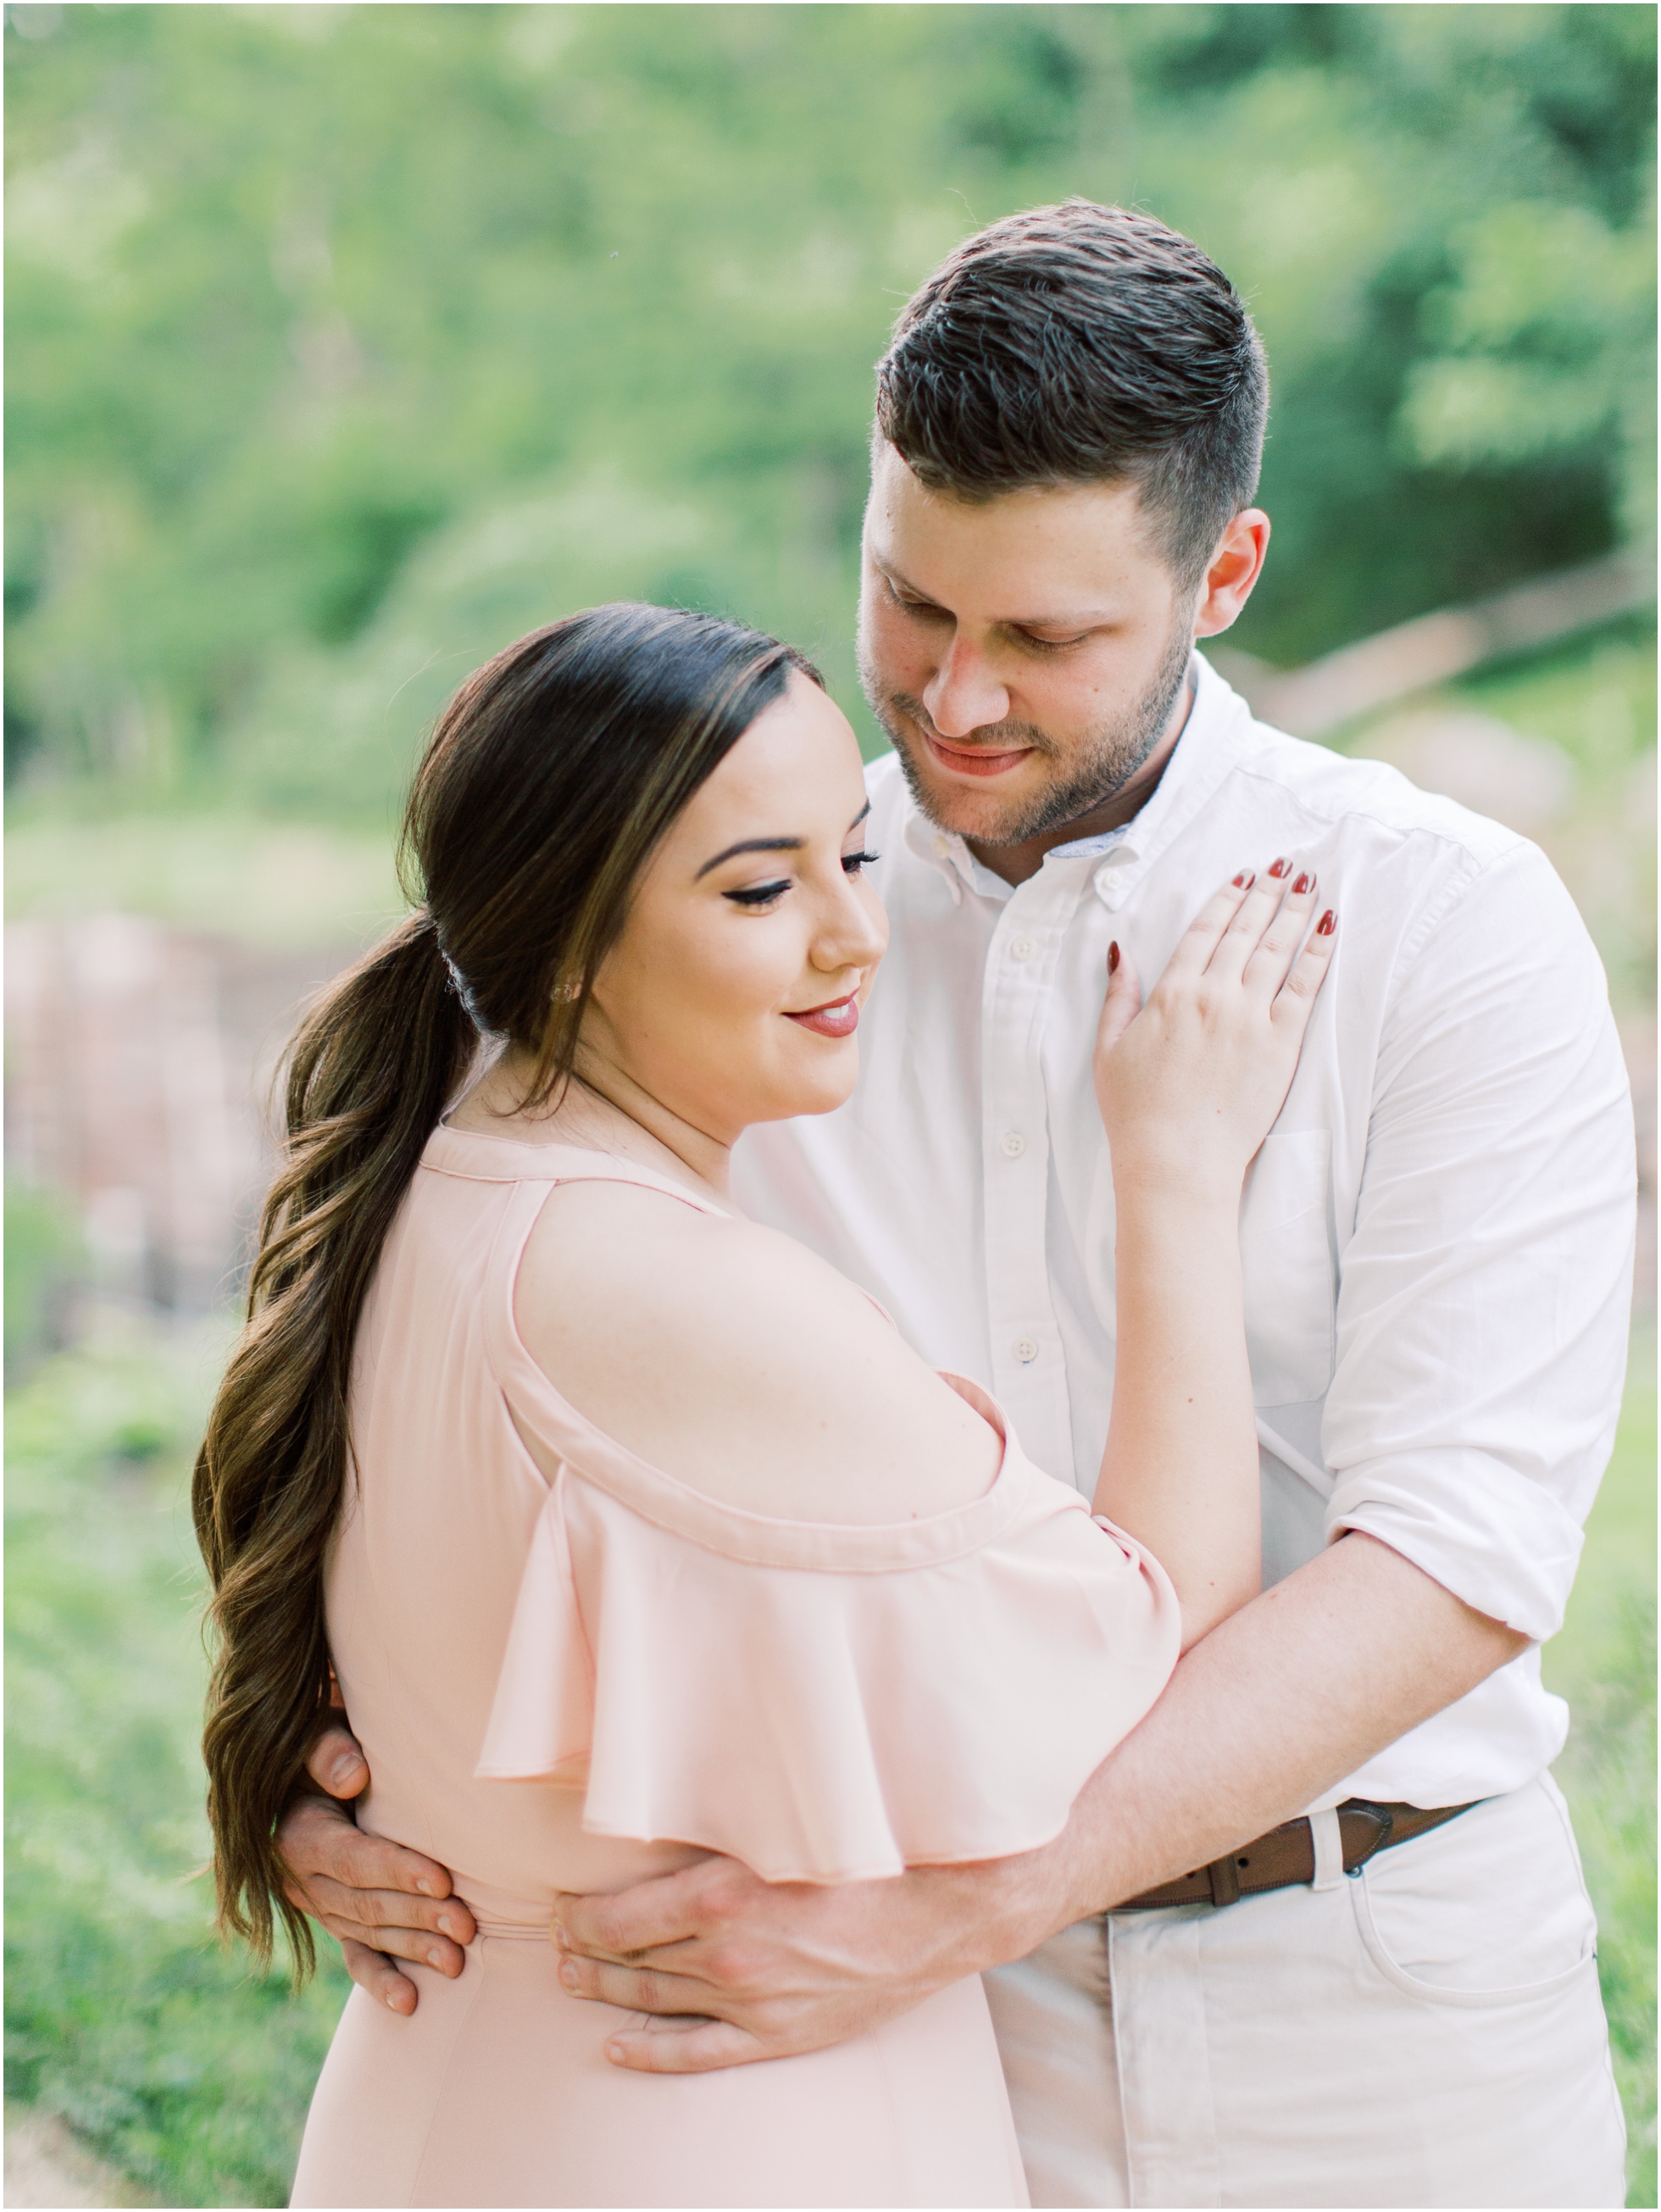 Nature-filled Engagement Session at the Billy Goat Trail